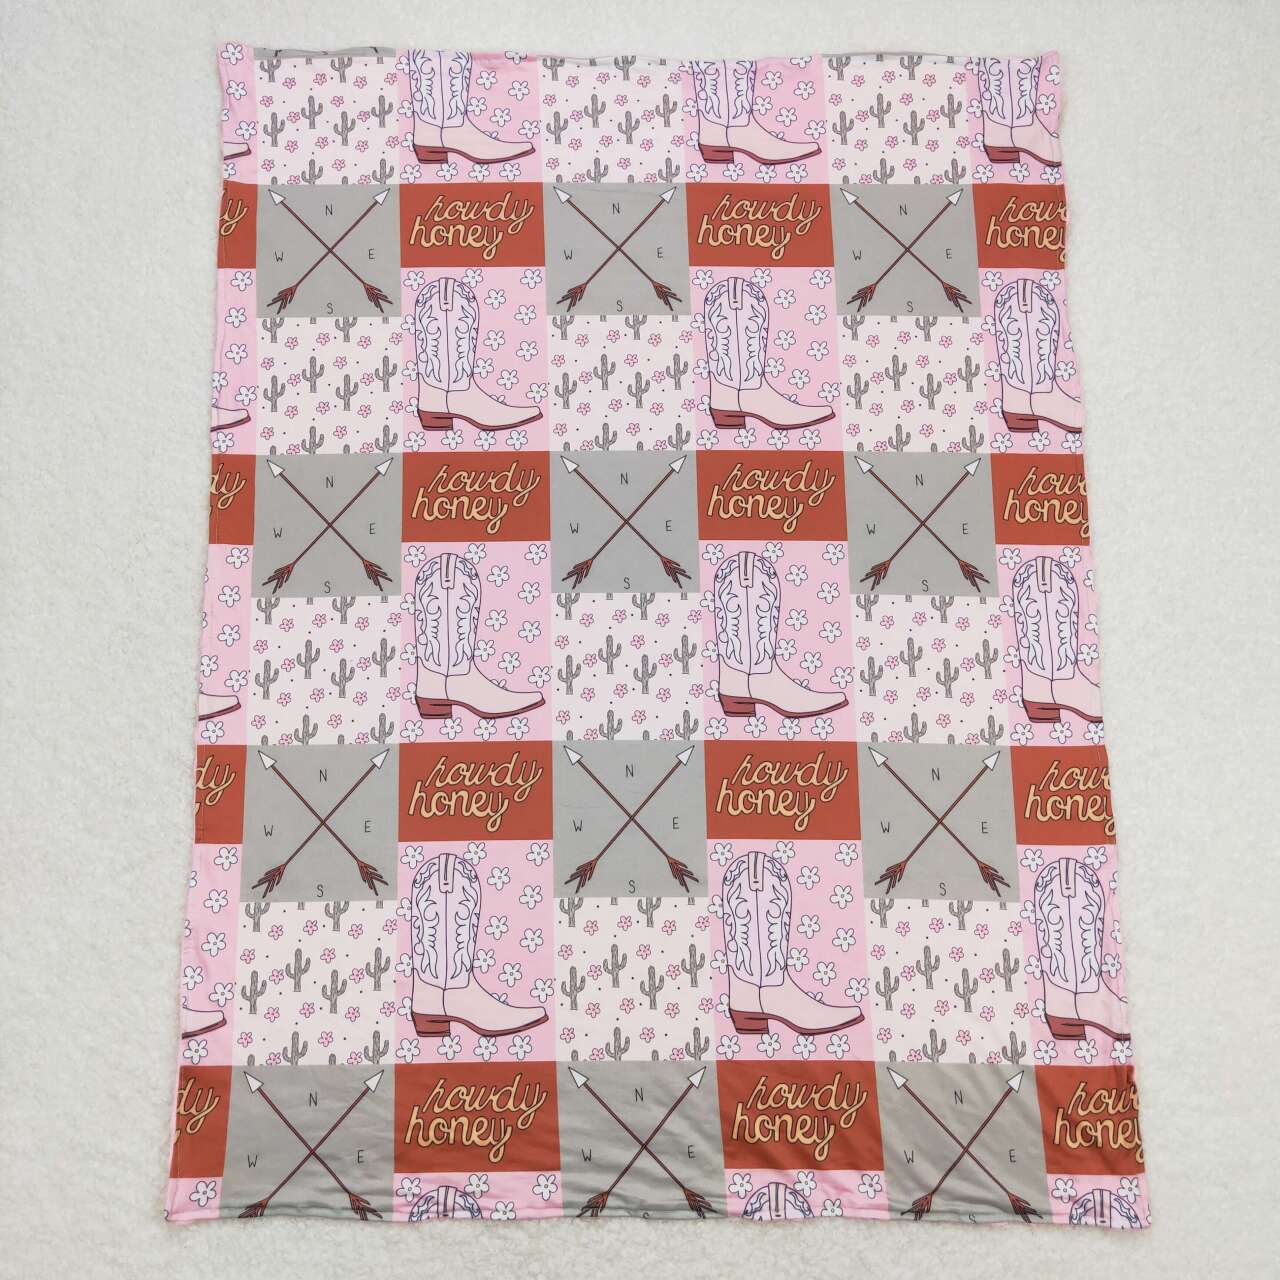 BL0123 Western howdy boot cactus pink Baby Blanket